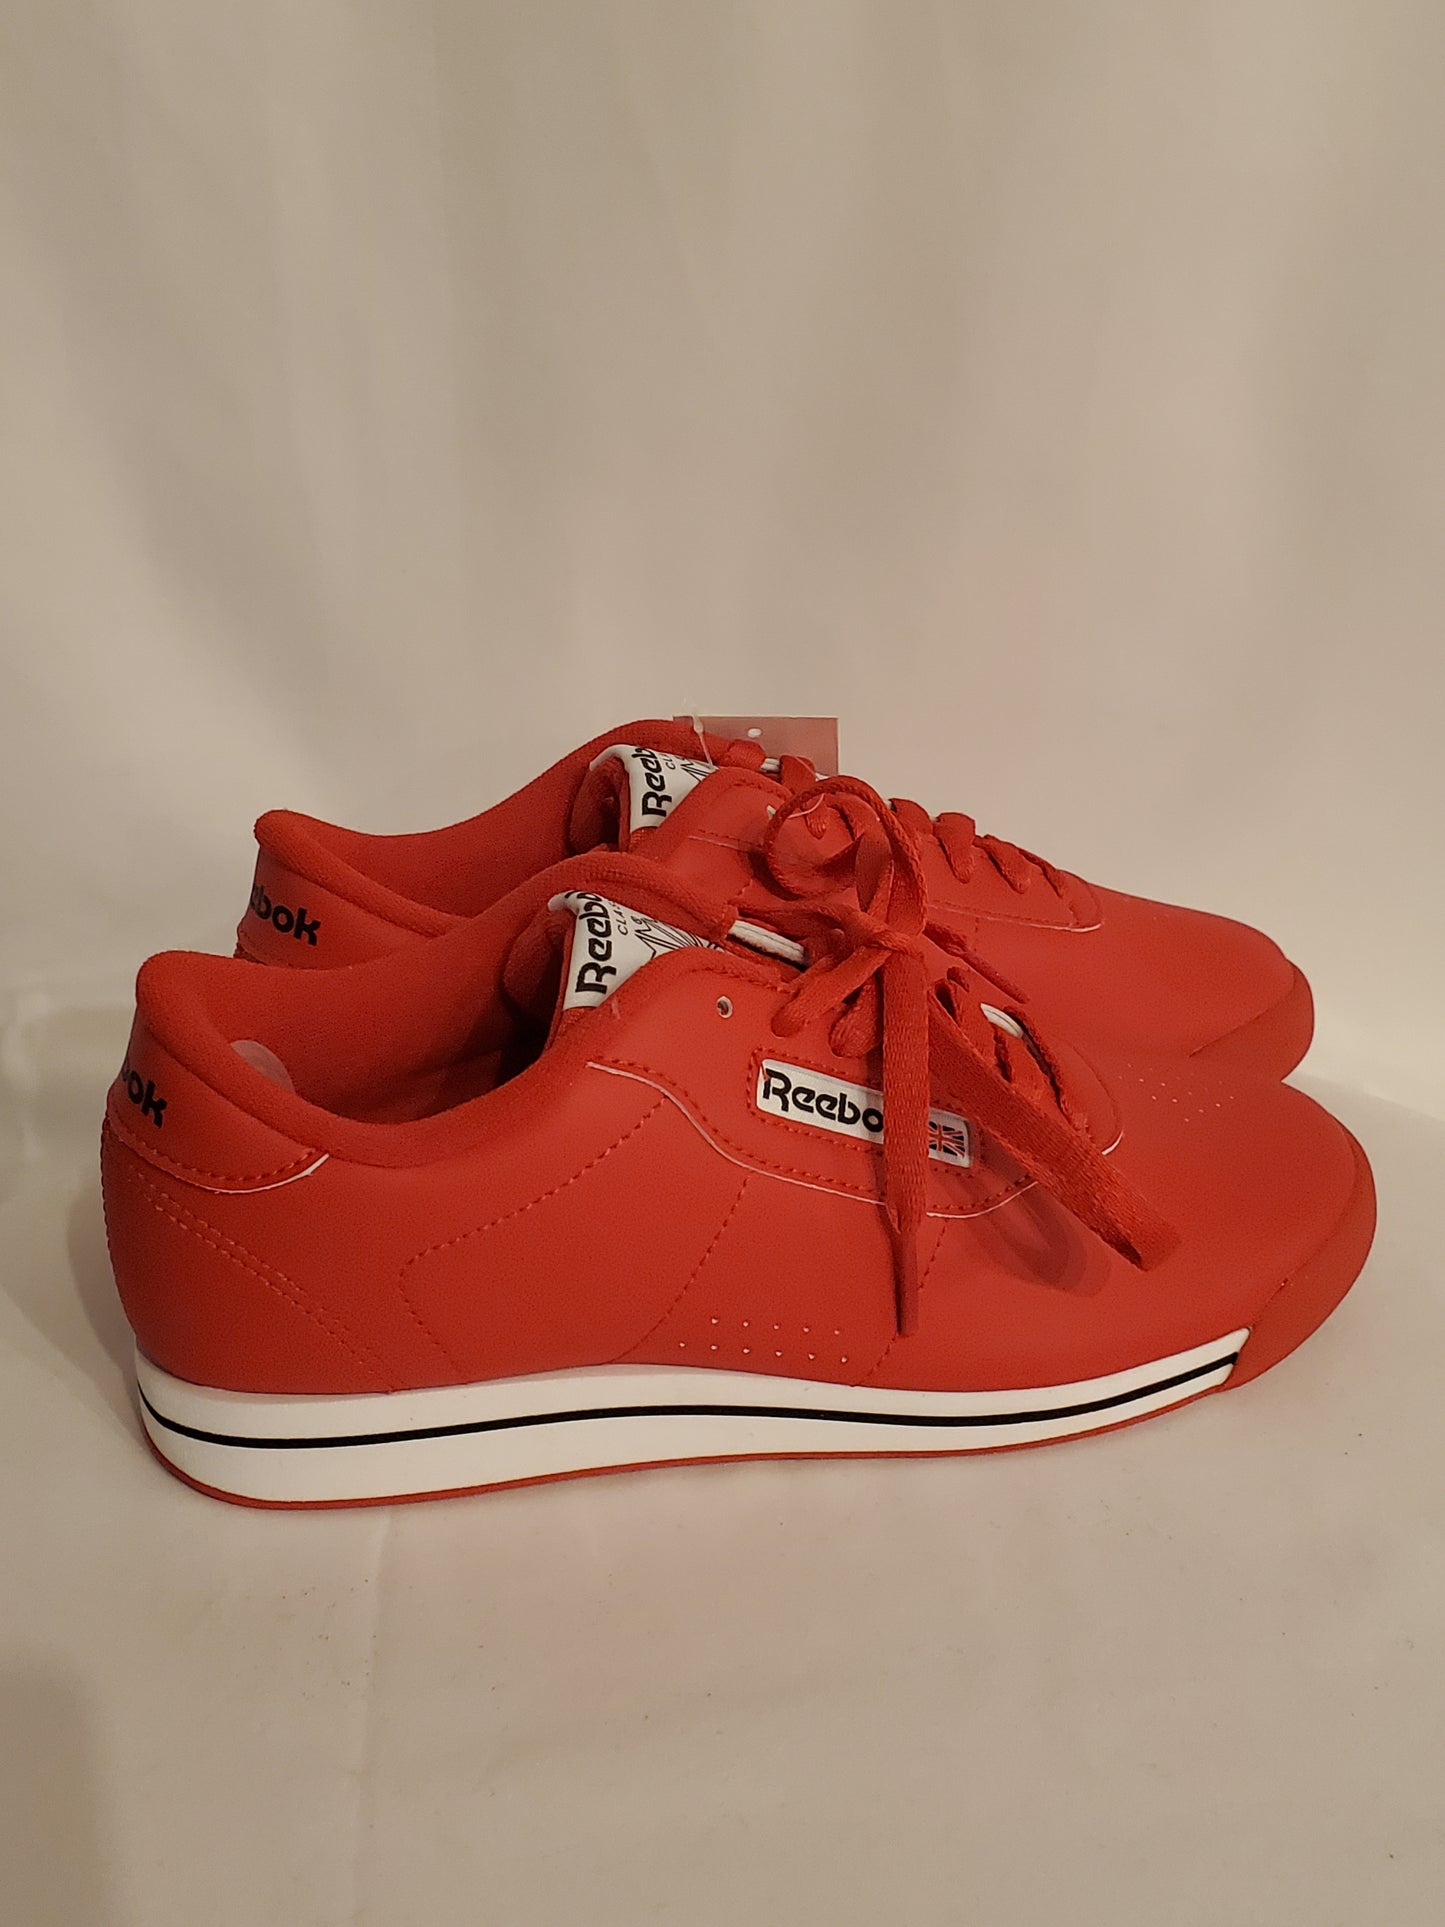 Shoes Sneakers By Reebok  Size: 6.5